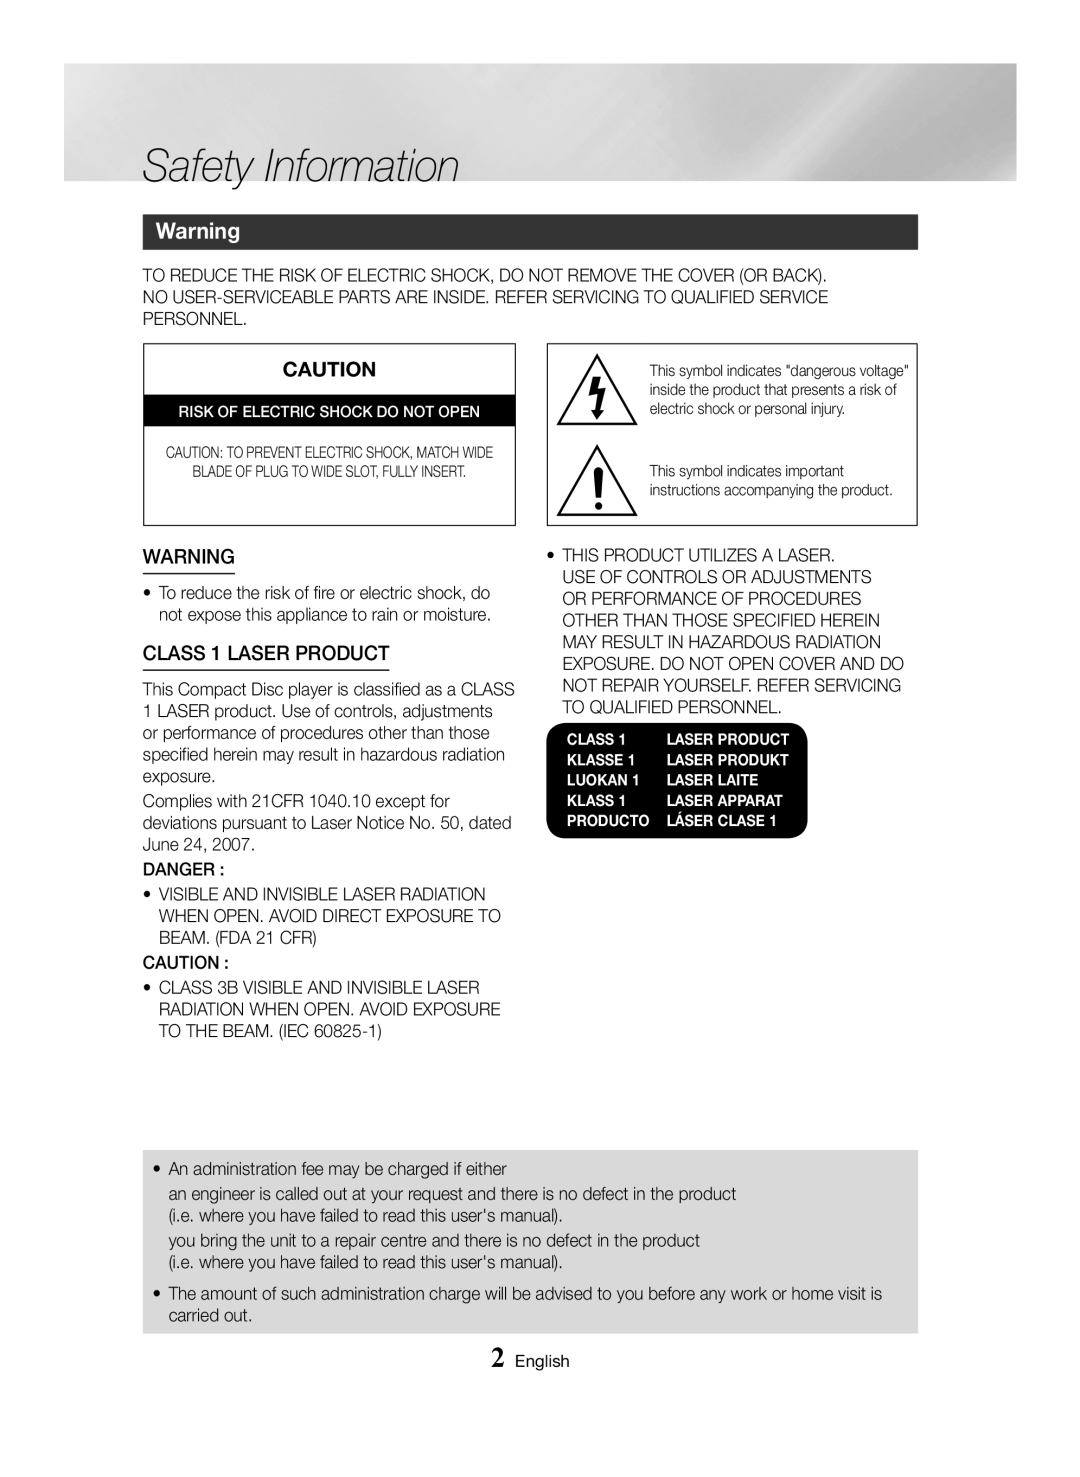 Samsung MX-HS8000/EN, MX-HS8000/ZF manual Safety Information, CLASS 1 LASER PRODUCT 